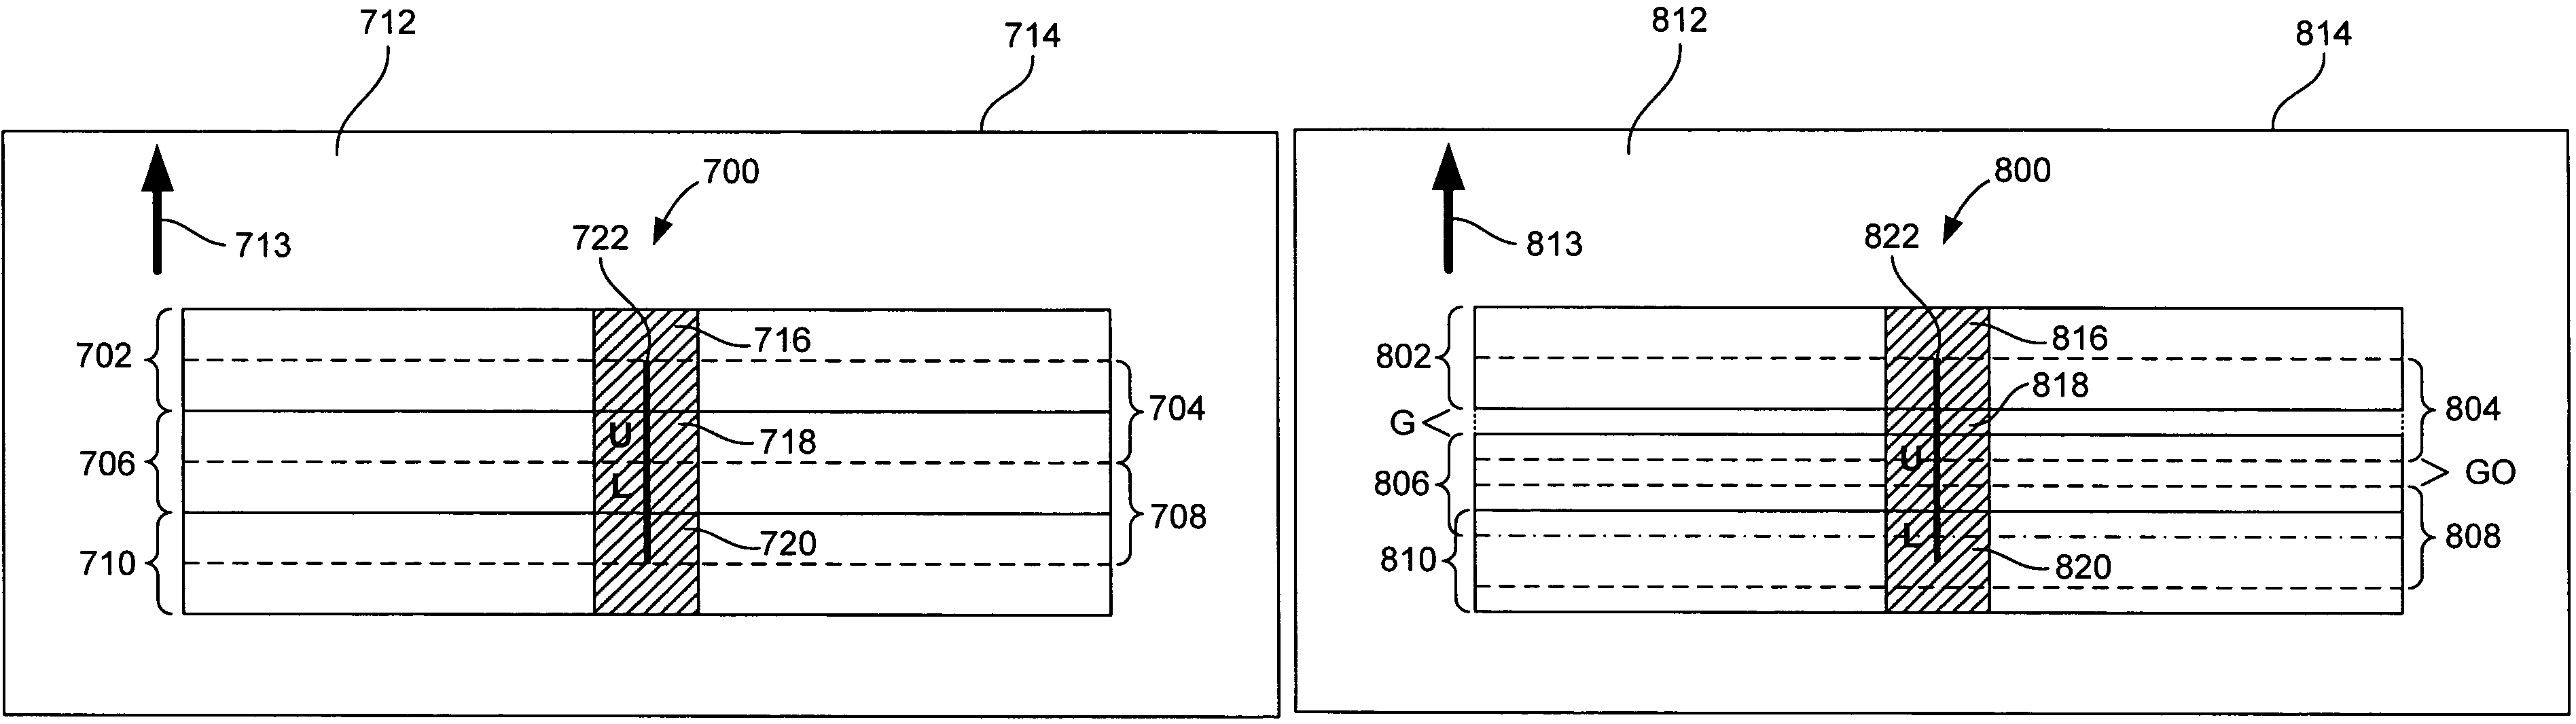 Laser printer with reduced banding artifacts